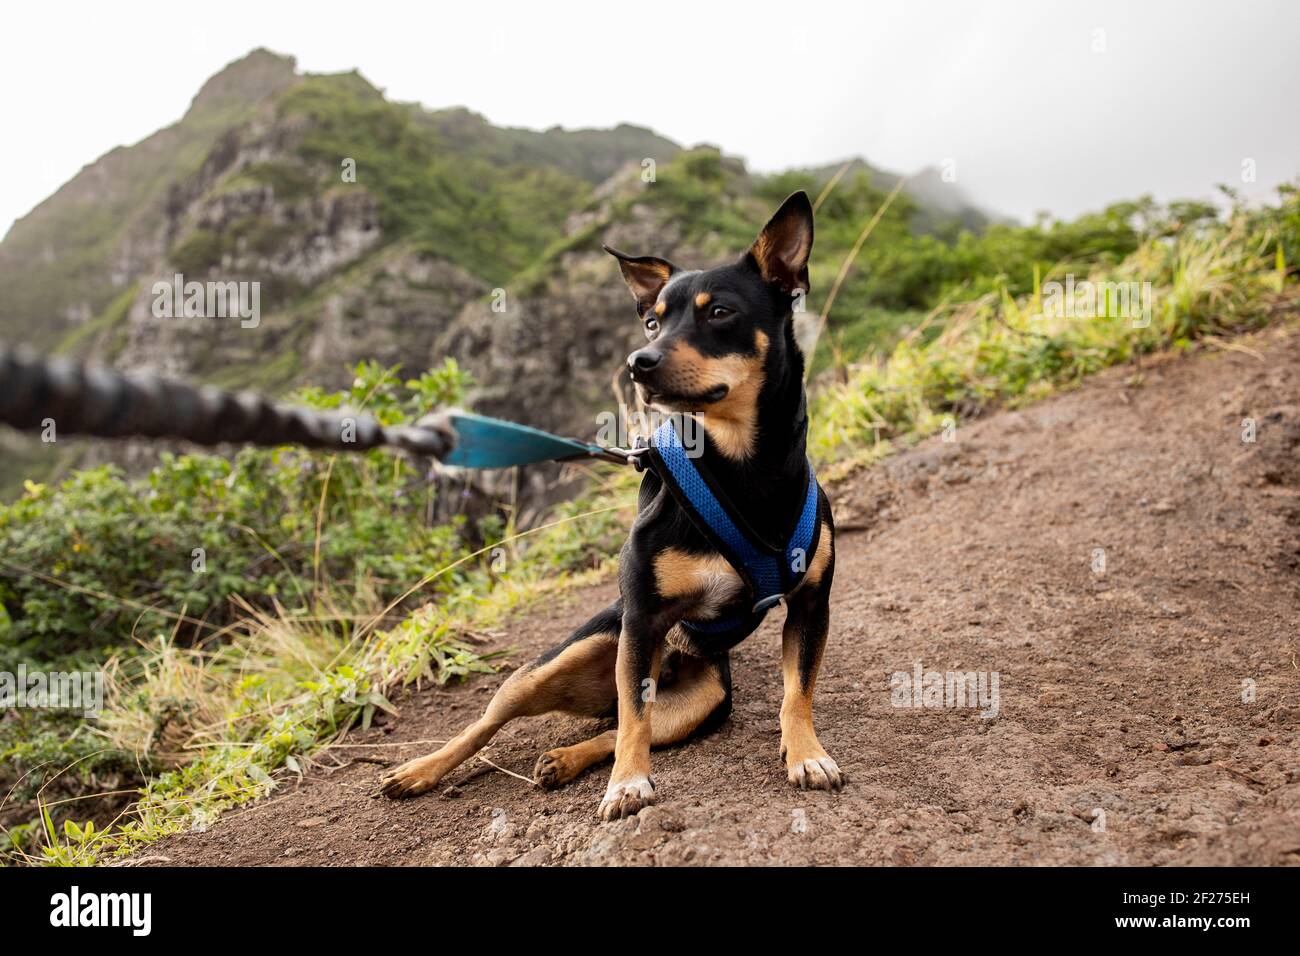 brown and black dog on leash sits in dirt on hillside Stock Photo